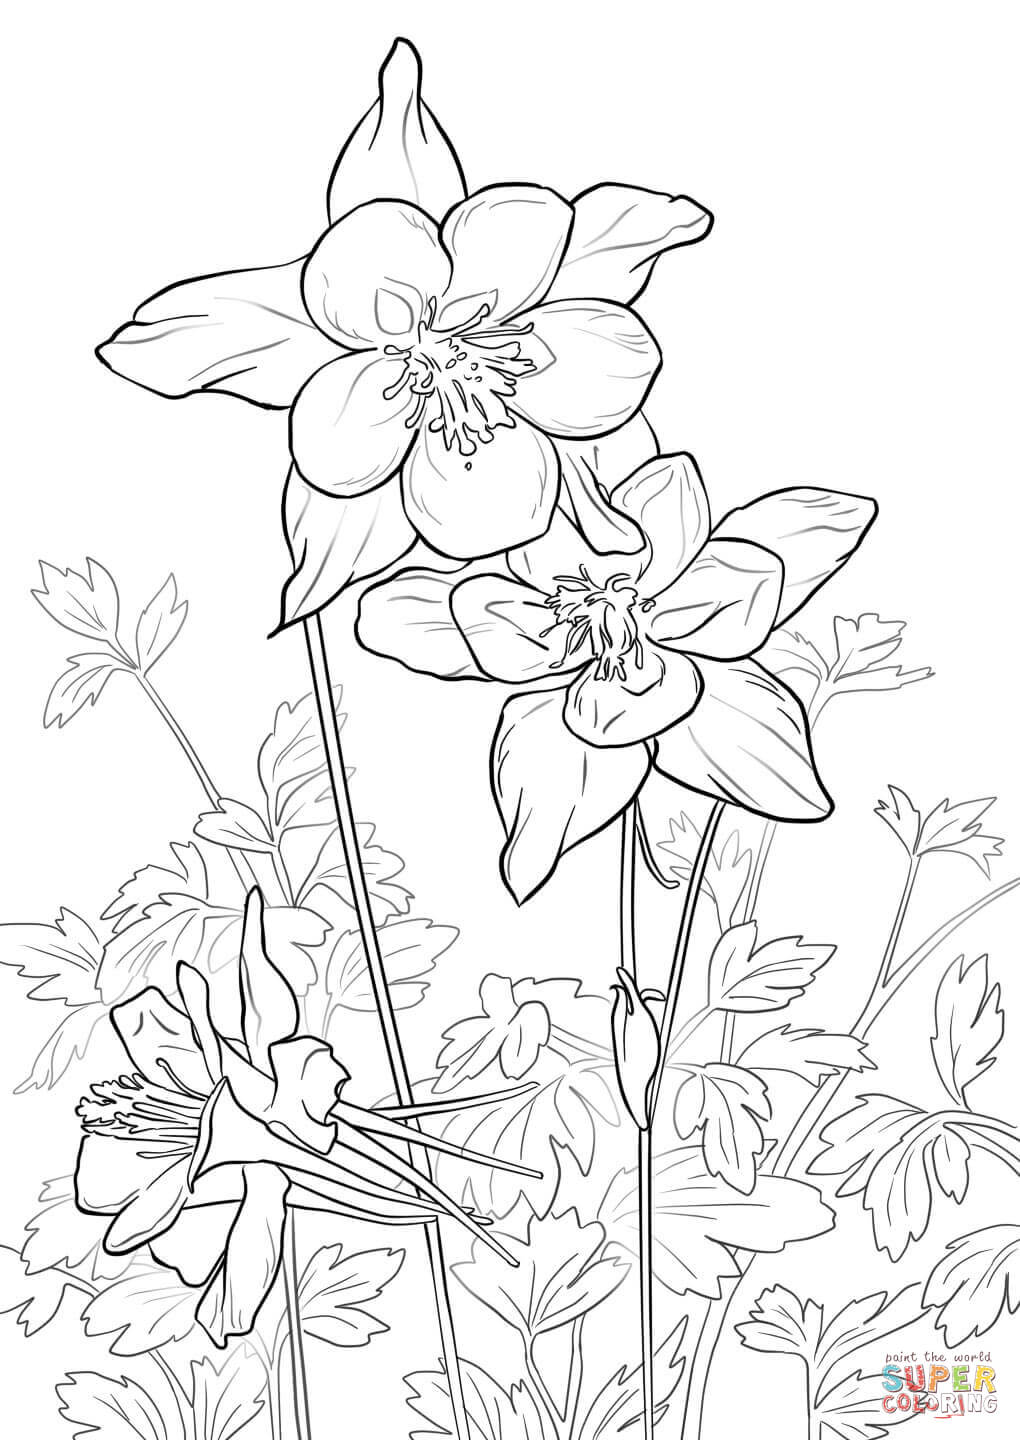 Rocky Mountain Columbine coloring page | Free Printable Coloring Pages